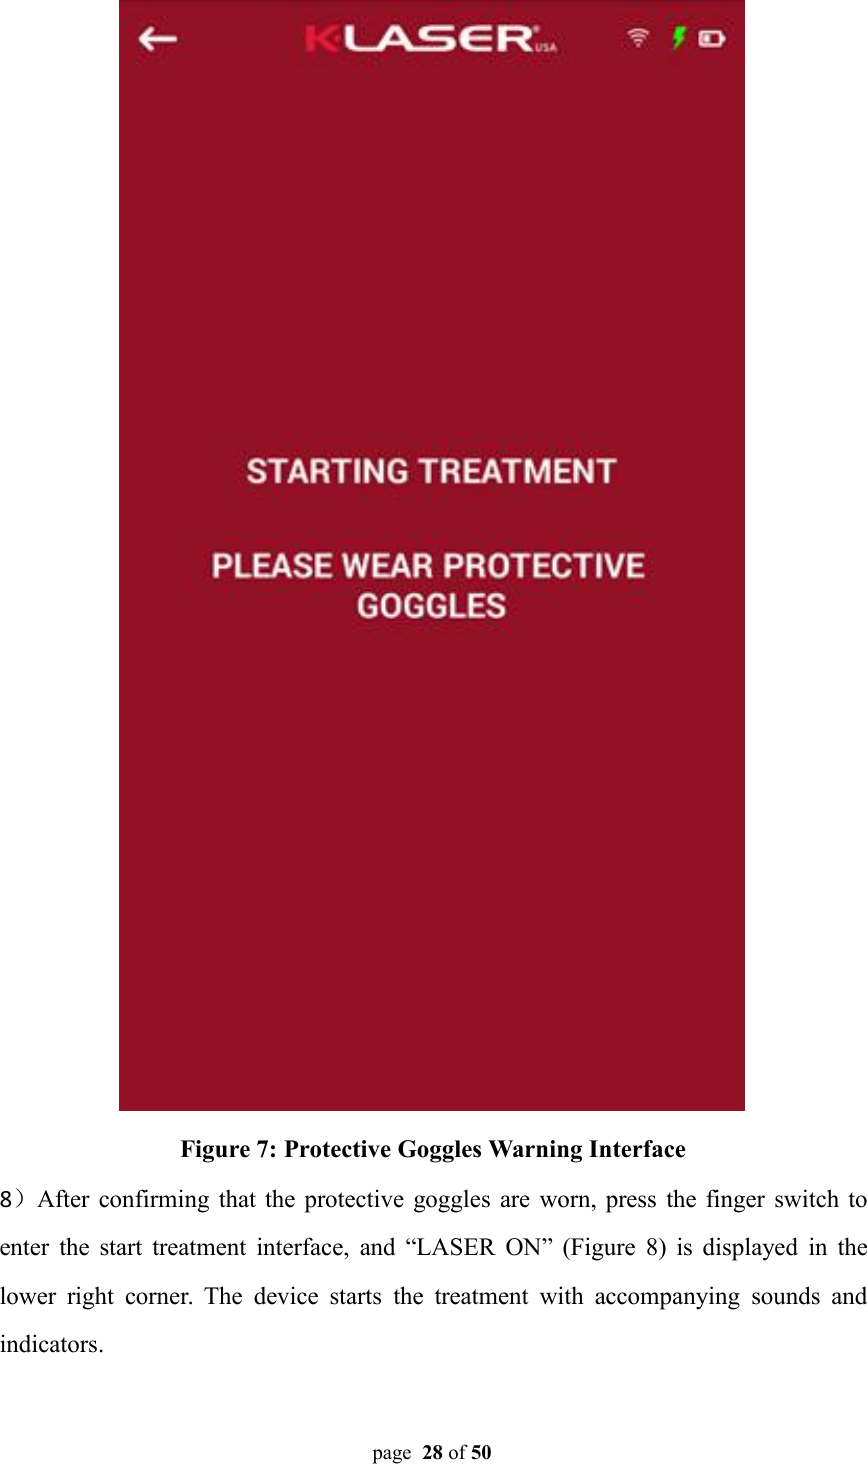 page 28 of 50Figure 7: Protective Goggles Warning Interface8）After confirming that the protective goggles are worn, press the finger switch toenter the start treatment interface, and “LASER ON” (Figure 8) is displayed in thelower right corner. The device starts the treatment with accompanying sounds andindicators.